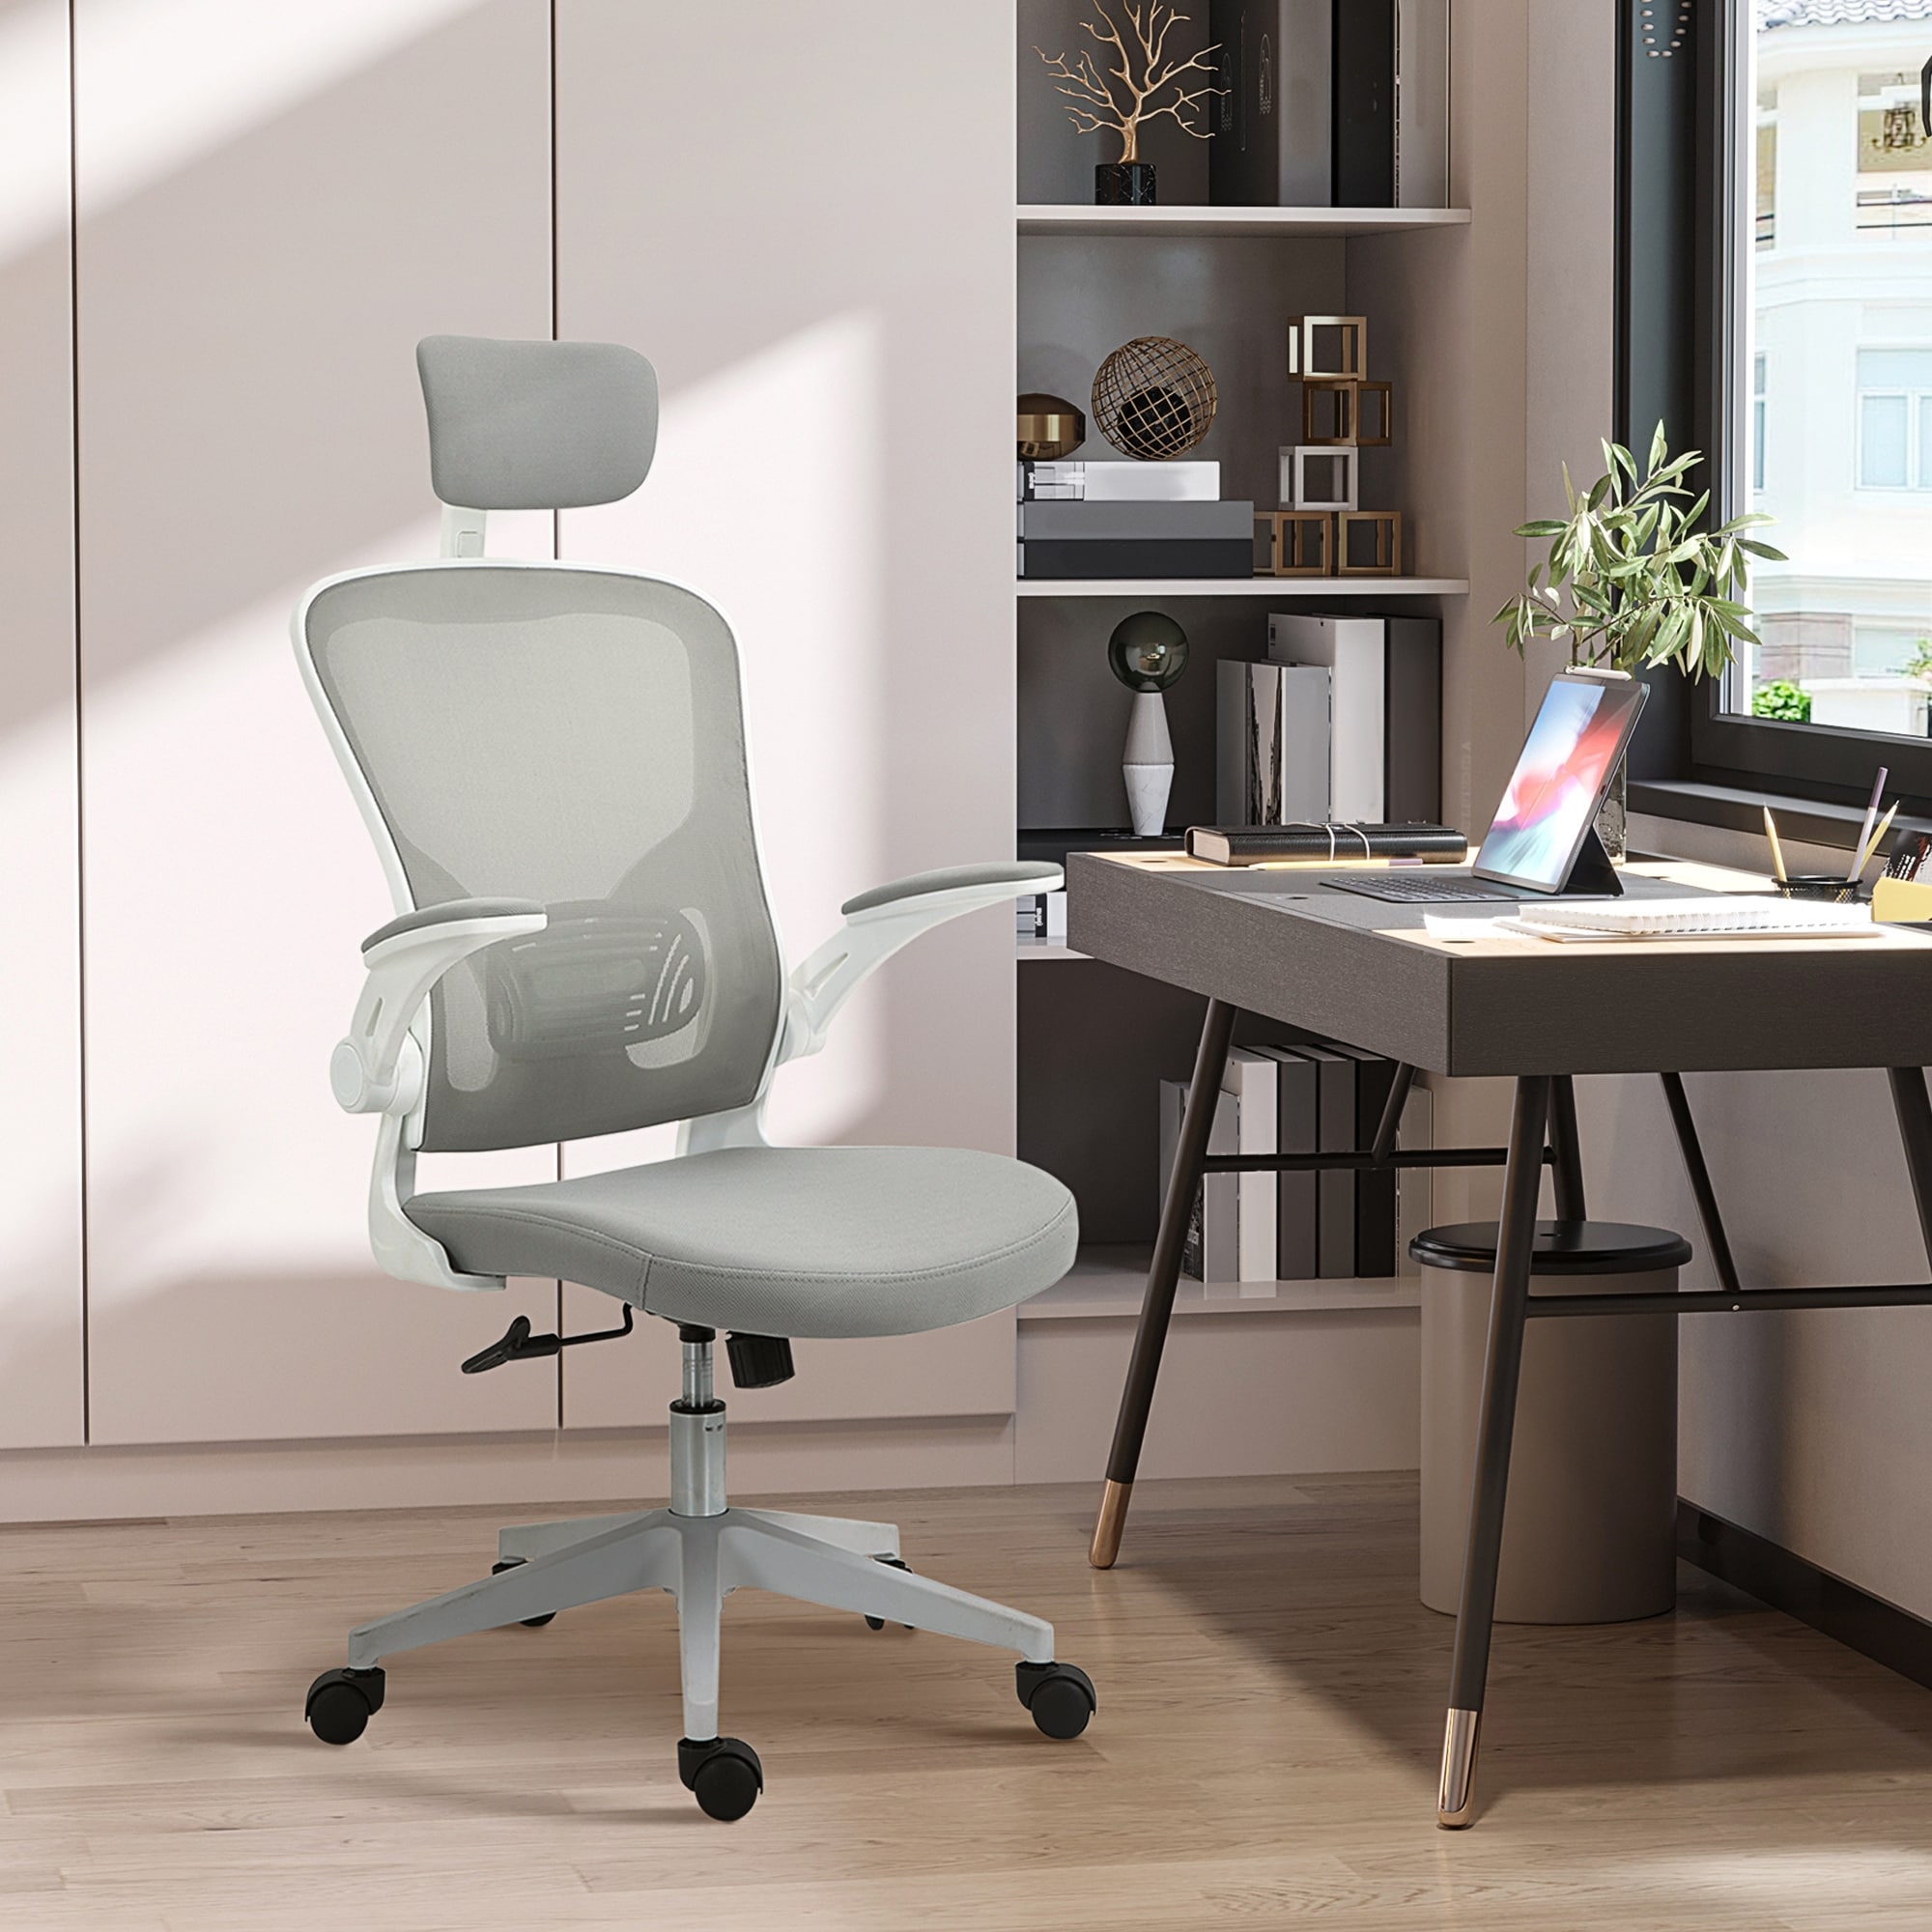 https://ak1.ostkcdn.com/images/products/is/images/direct/97558fa7e17f20f880cc4ef8ea1a237315d1ff3b/Vinsetto-High-Back-Mesh-Chair%2C-Home-Office-Task-Computer-Chair-with-Adjustable-Height%2C-Lumbar-Back-Support%2C-Headrest%2C-and-Arms.jpg